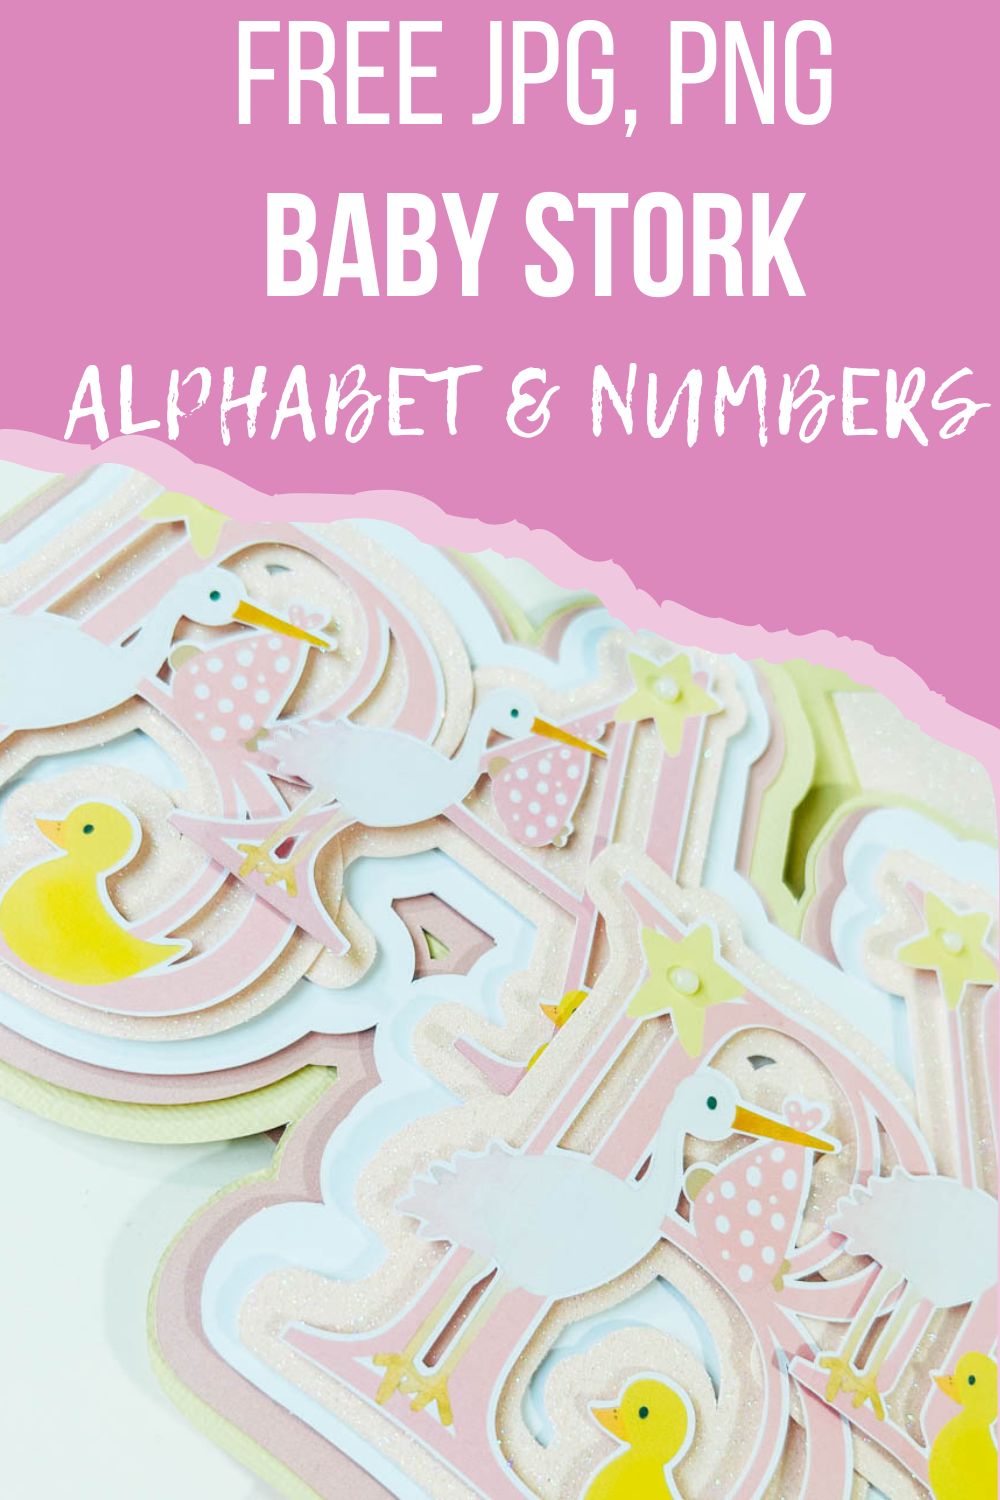 Free JPG PNG Printable Pink Baby Stork Alphabet for Cricut, Silhouette and Sublimation